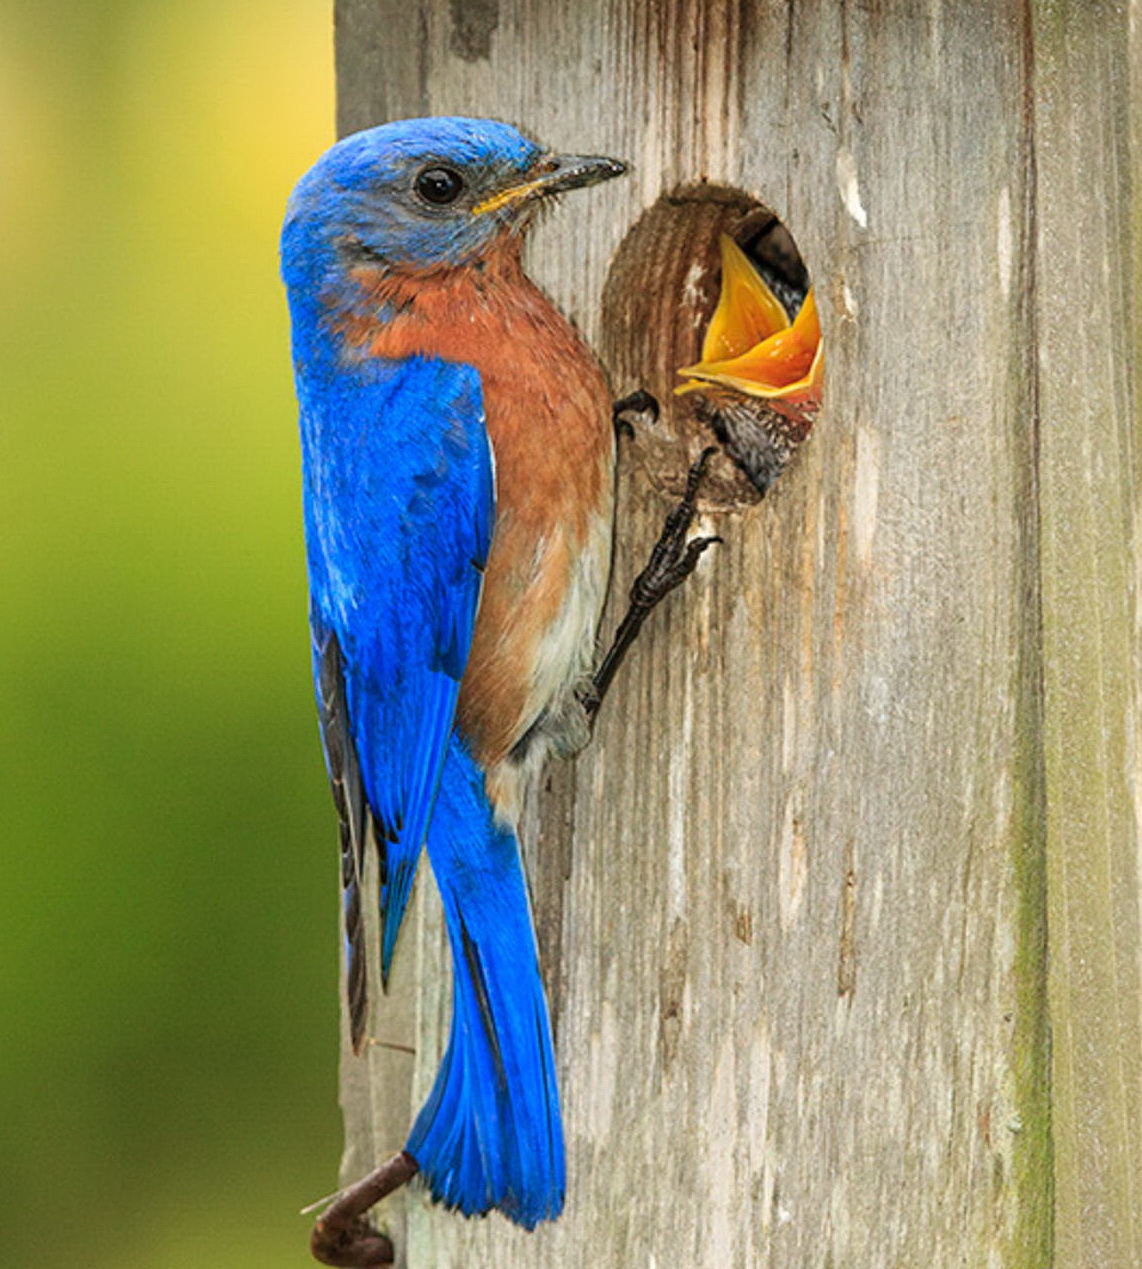 Associated image for entry 'bluebird'